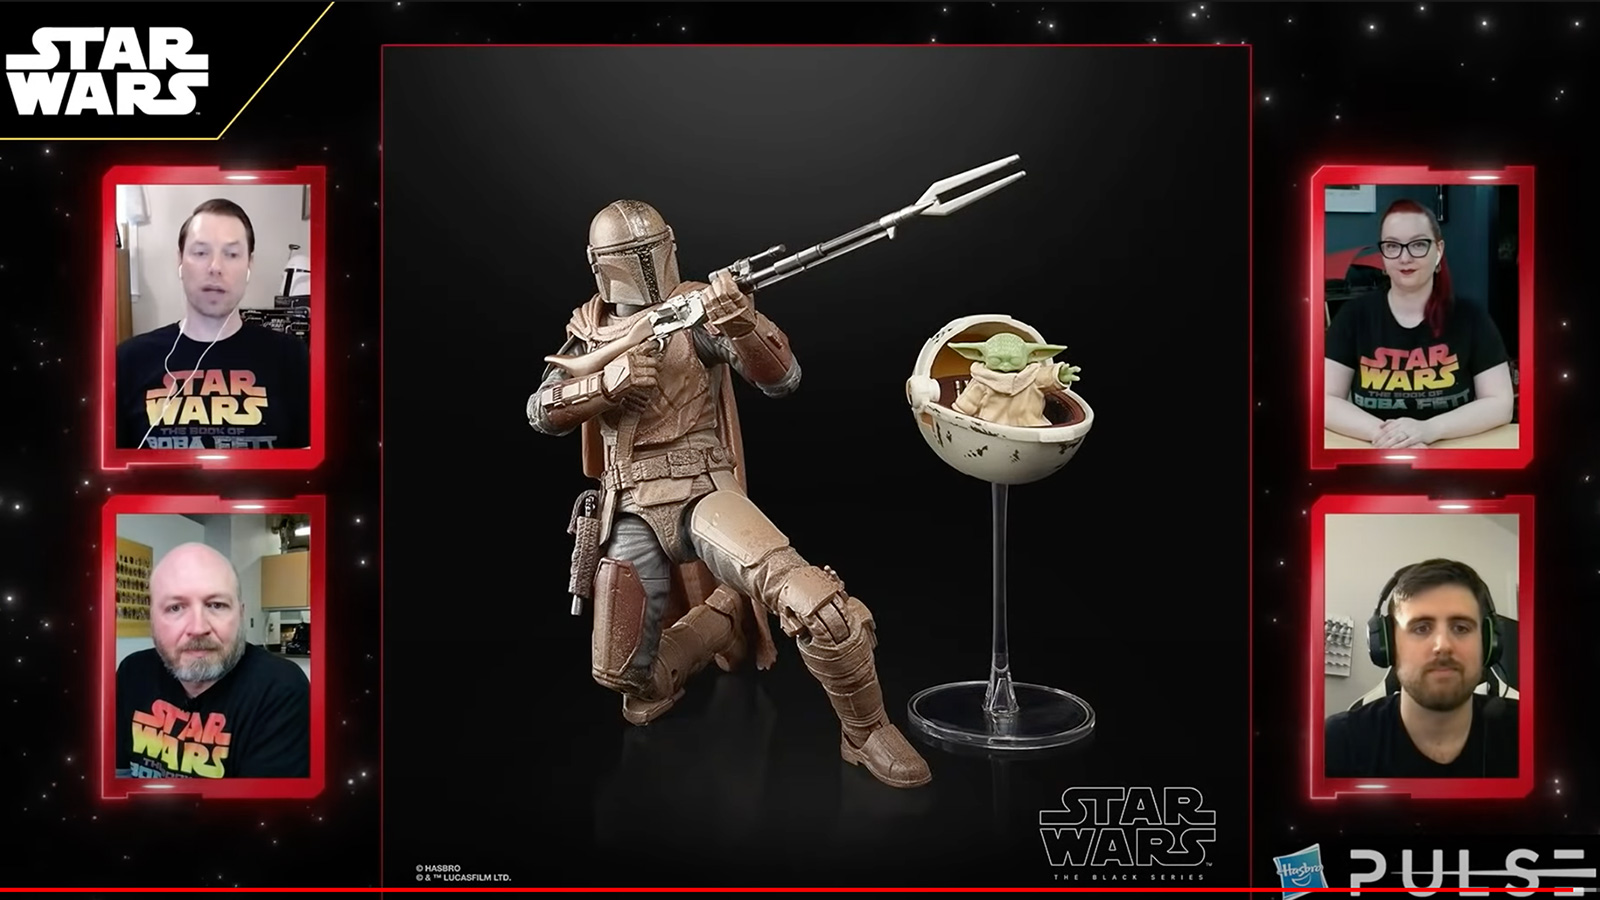 Frustrated Yet In Trying to Buy Target’s Exclusive TBS 6-Inch The Mandalorian and Grogu (Arvala-7)? Hasbro Says Release Date Is March 27th…. What?